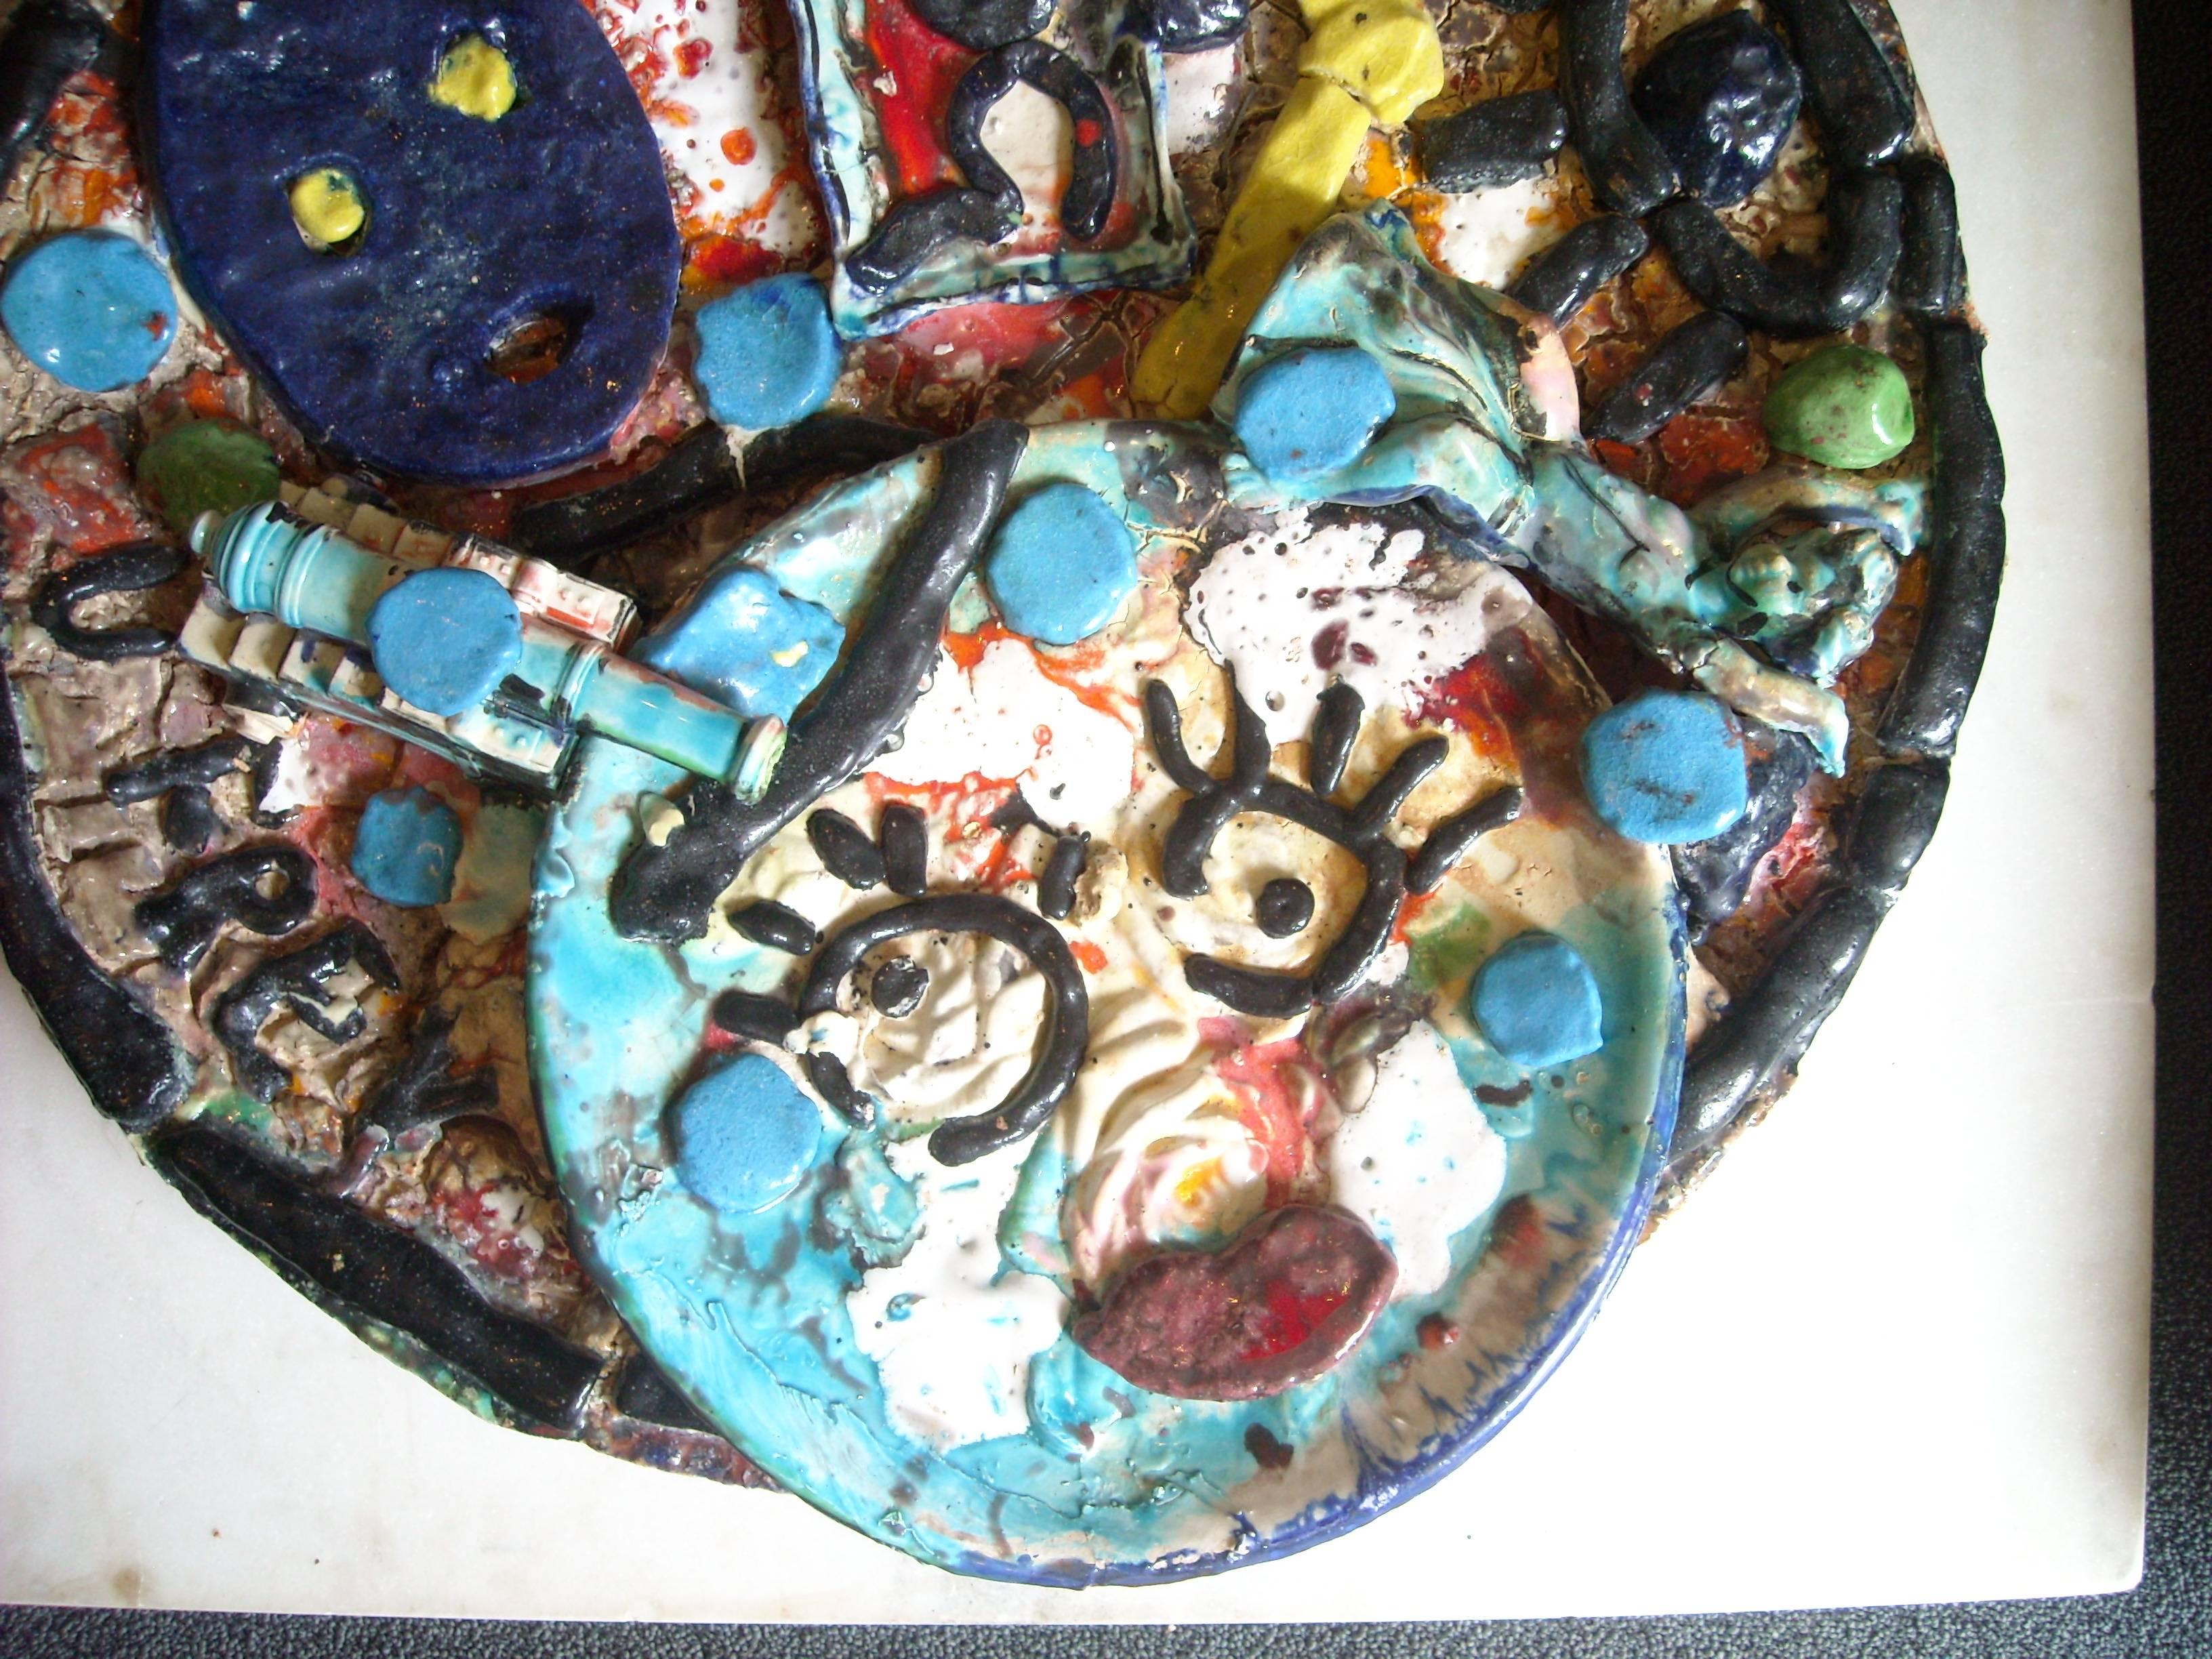 Amazing ceramic charger/plate by the well-known artist Viola Frey 1933-2004. This piece is signed and dated 1989, as shown in pictures.